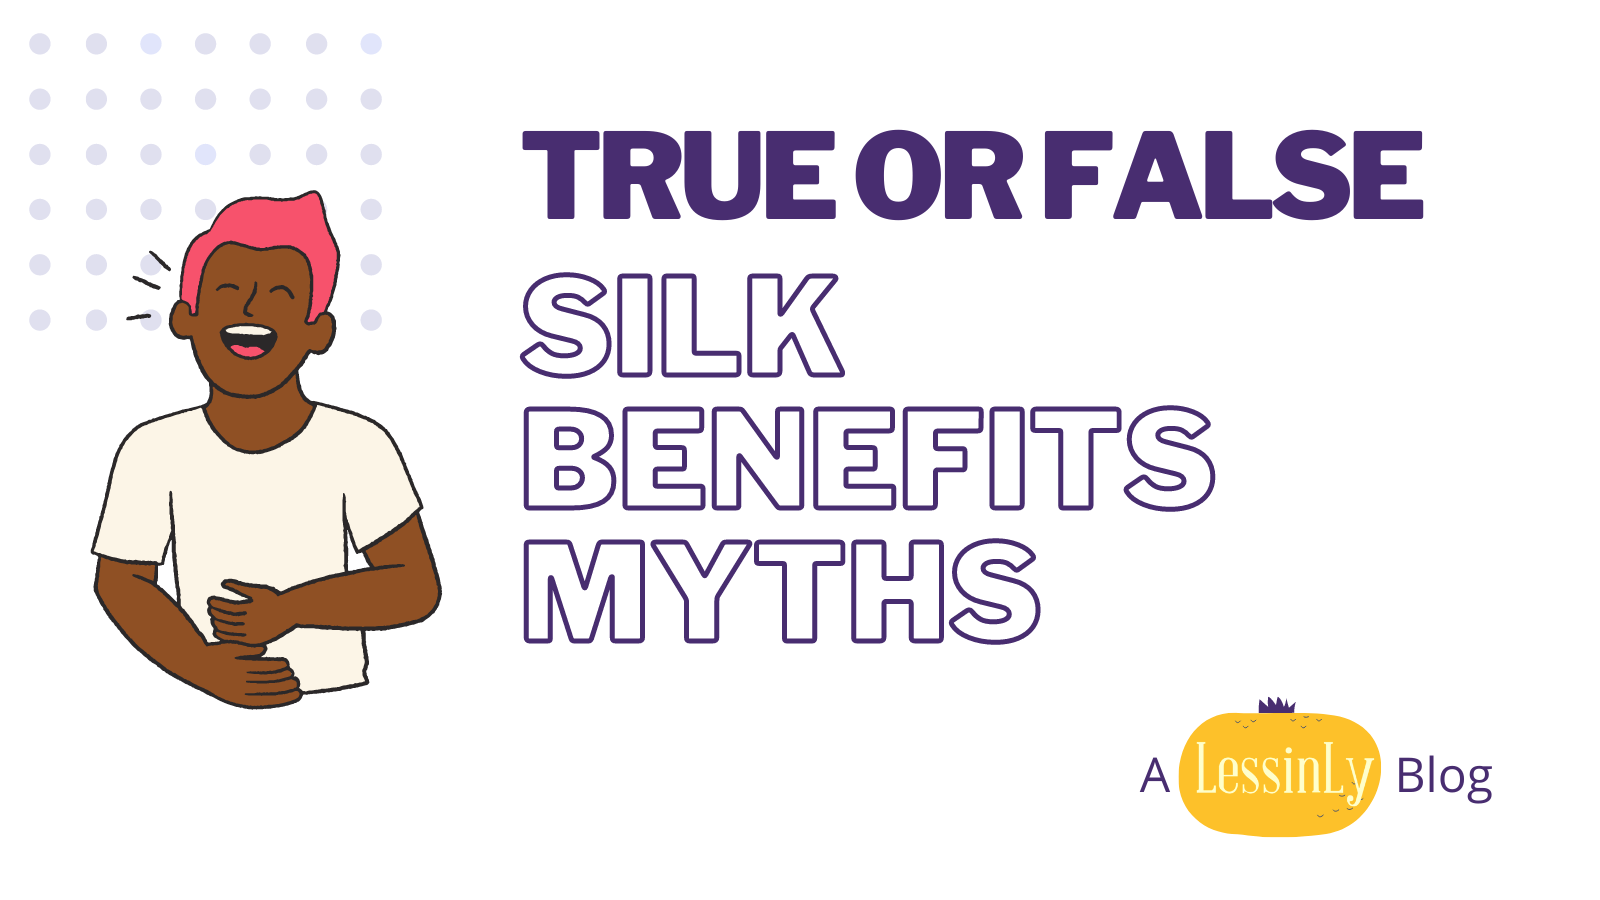 5 Myths of silk benefits featured image - Lessinly Silk Blog